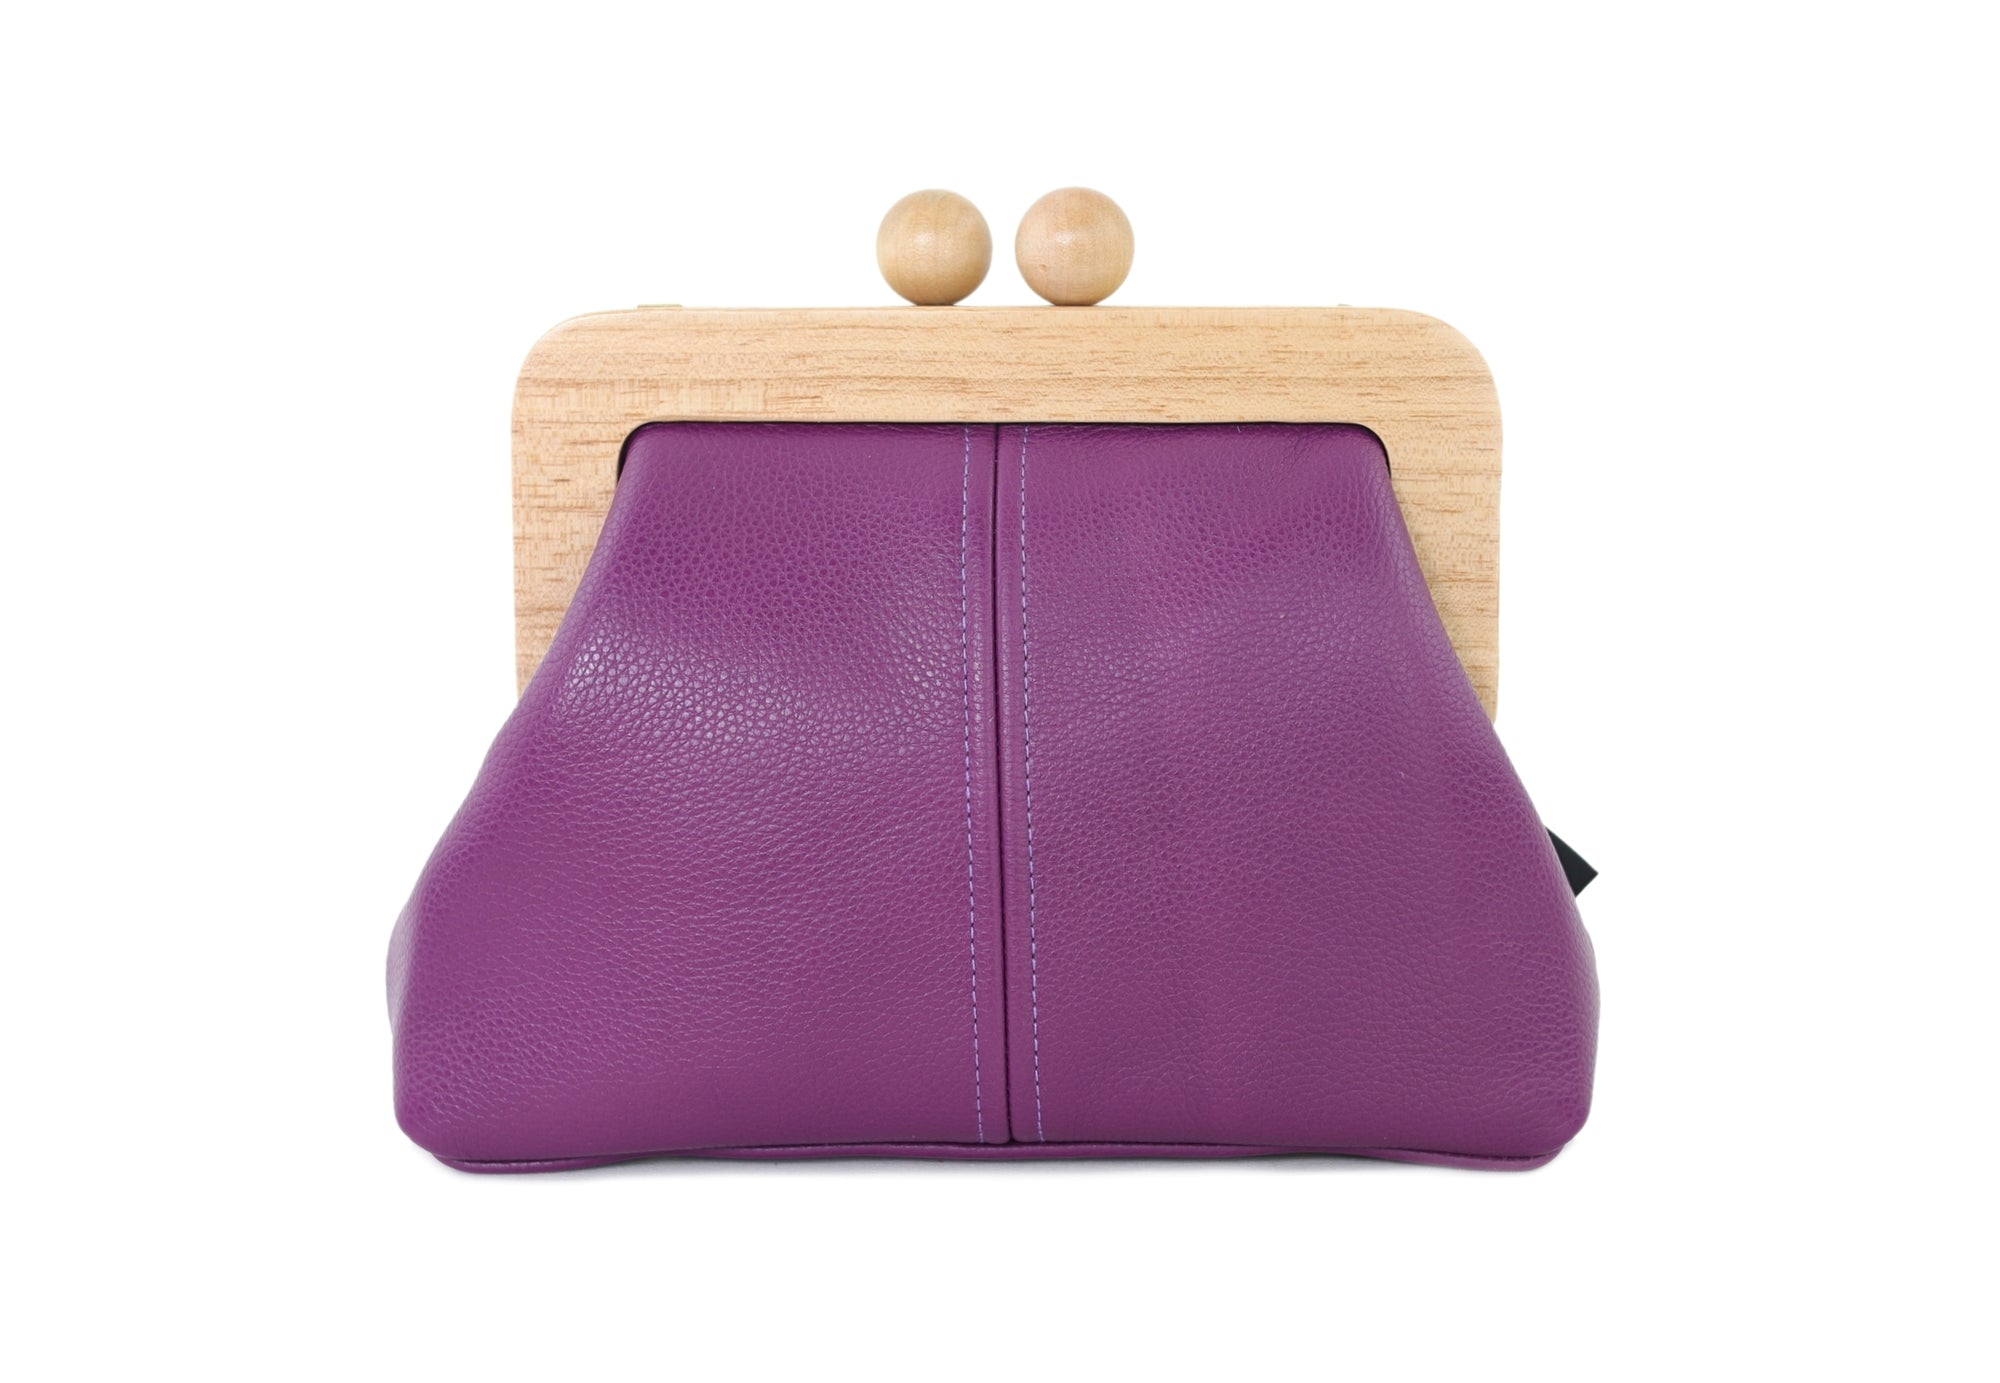 Women's Purple Genuine Leather Clutch Bag with Strap | PINK OASIS